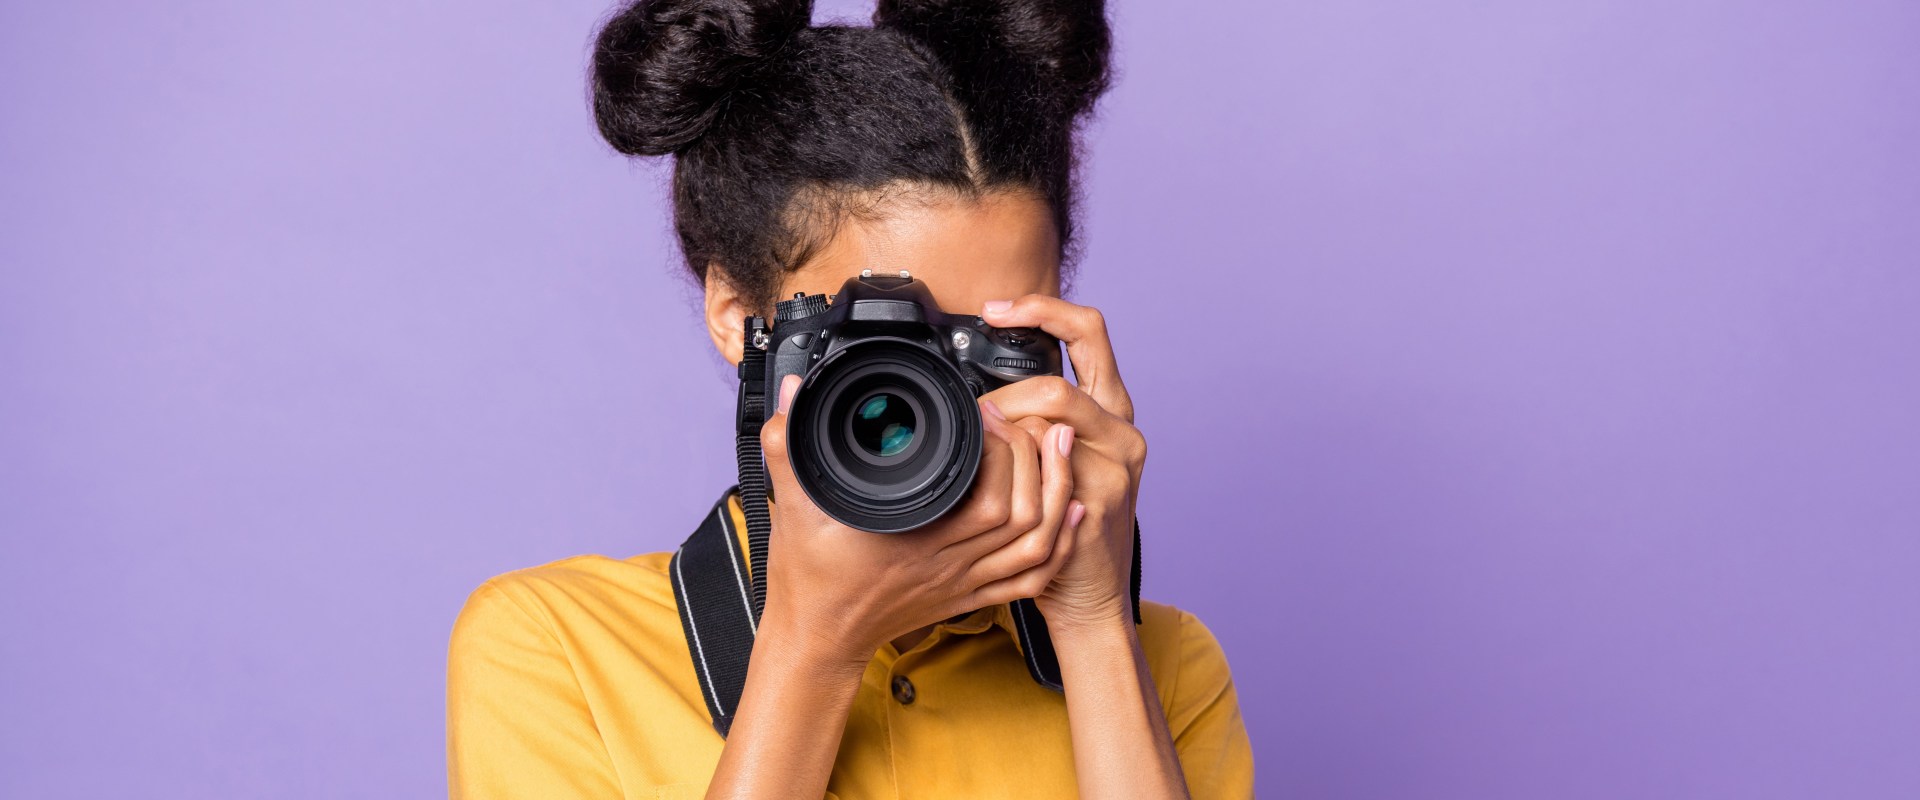 How to Teach Yourself Photography and Master Your Camera